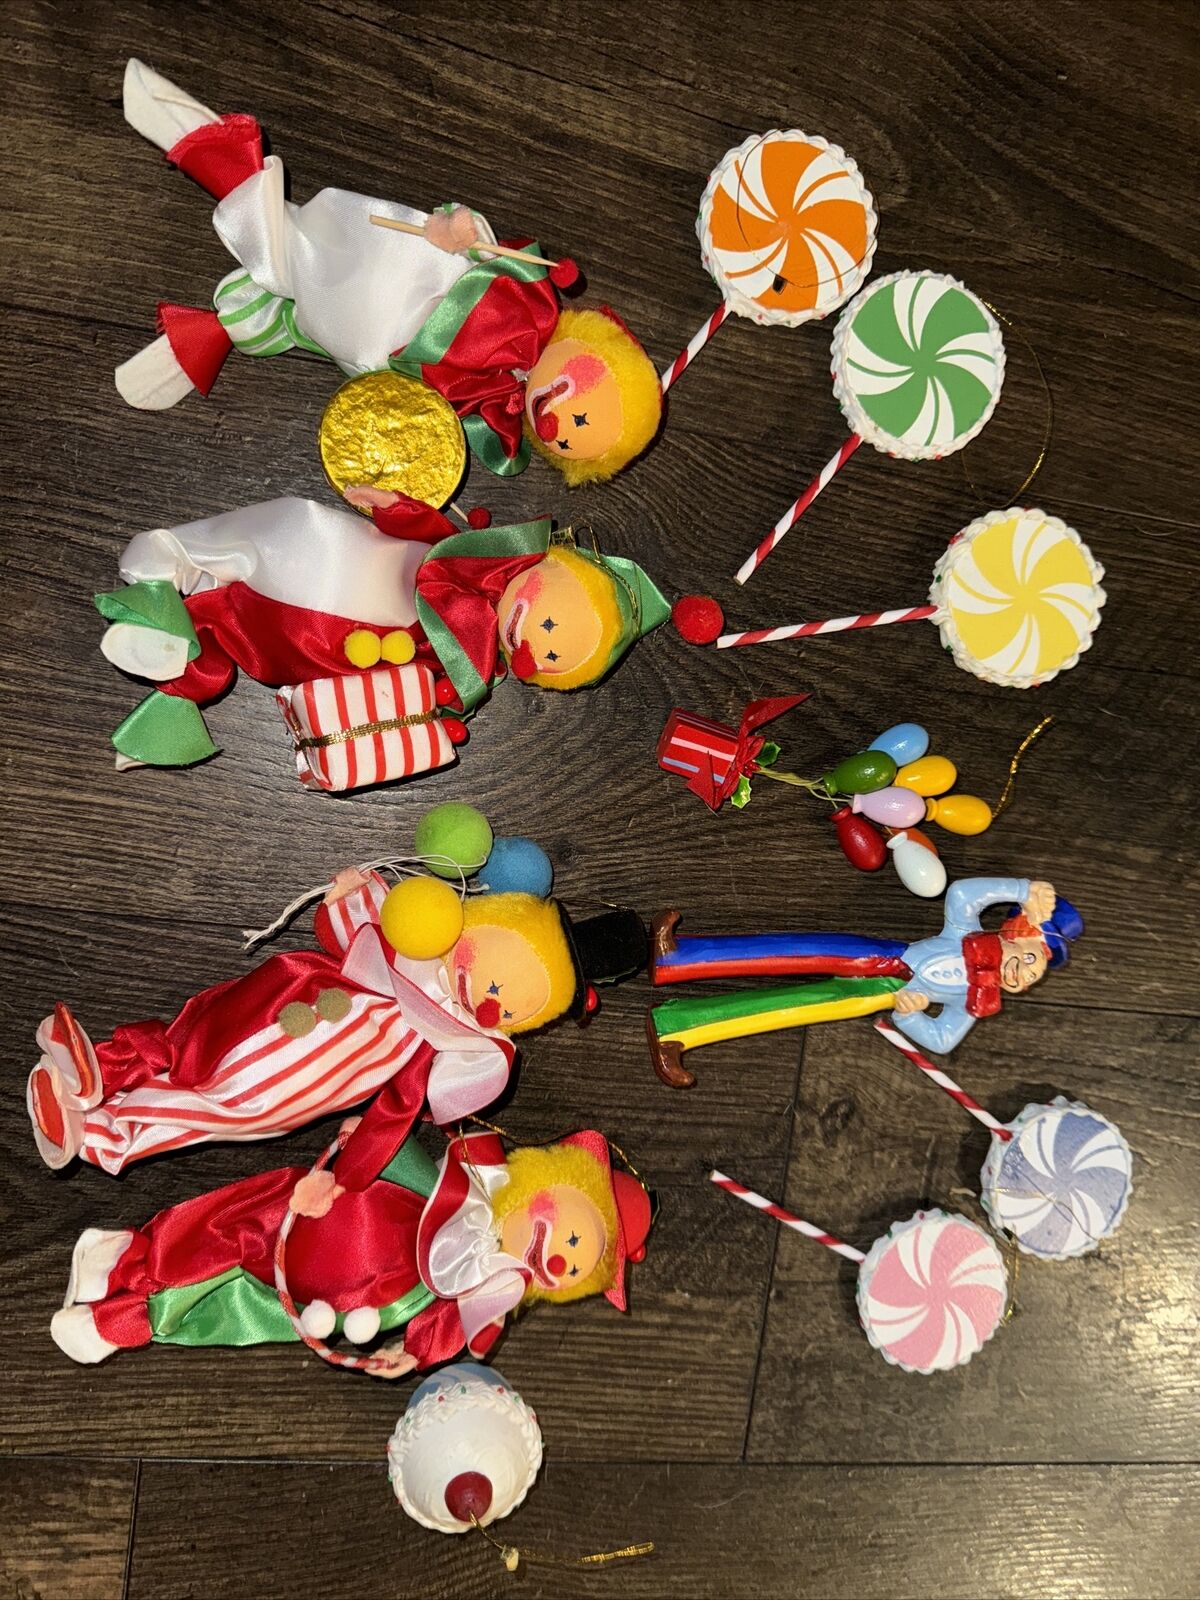 Vintage 1980s Russ Brand Clown Circus Ornaments Made In Taiwan Mixed Lot